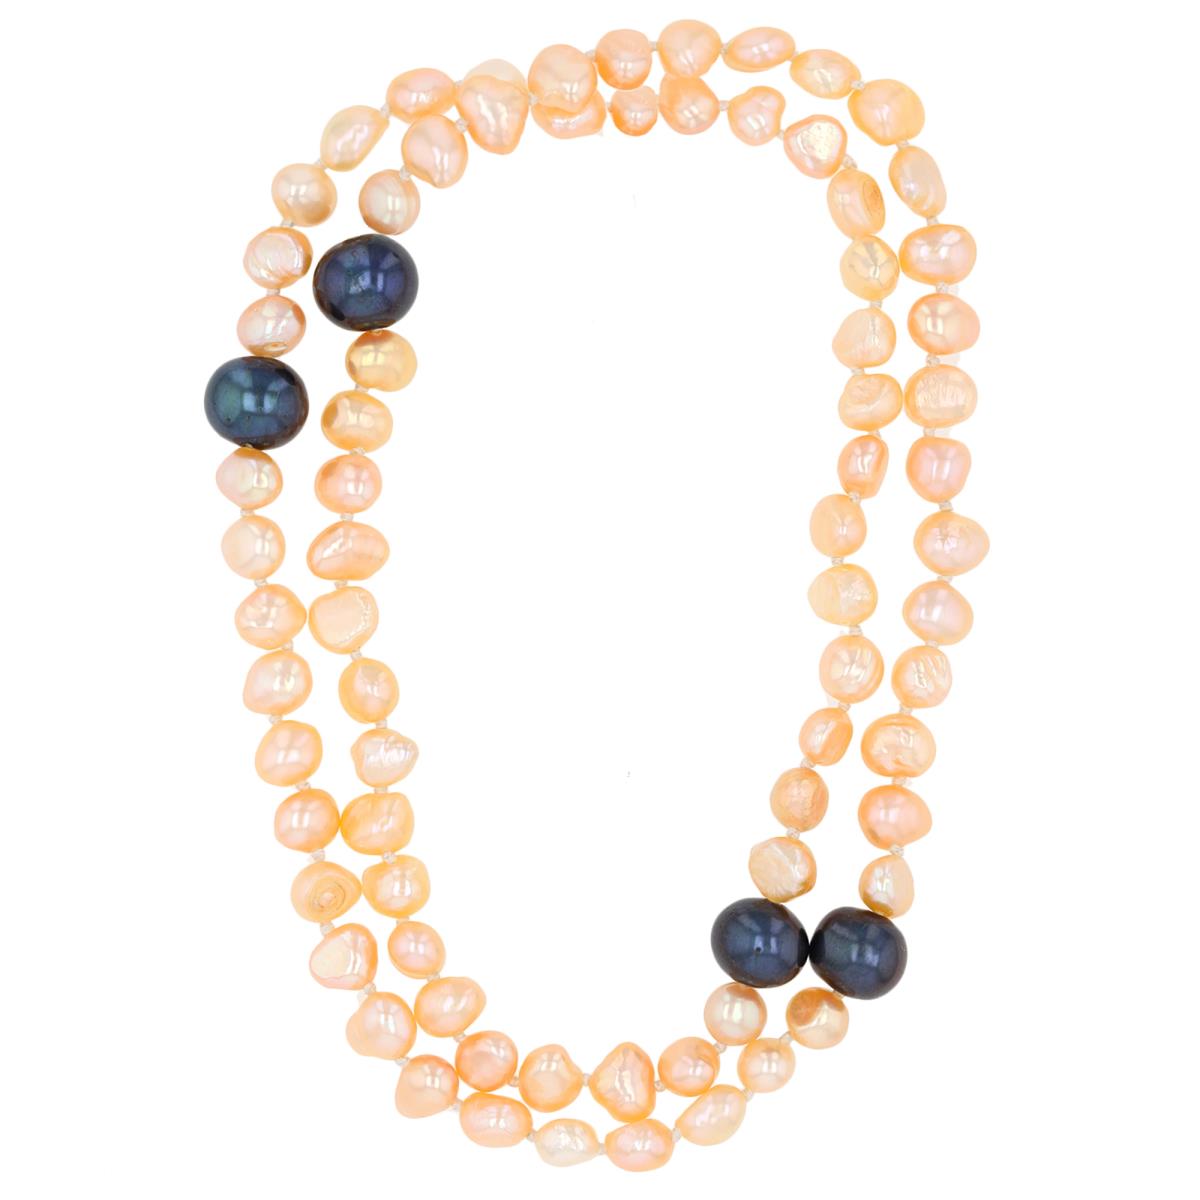 9-10mm Dyed Near Round & 6-7mm Champagne Dyed Baroque Pearls 36" Necklace